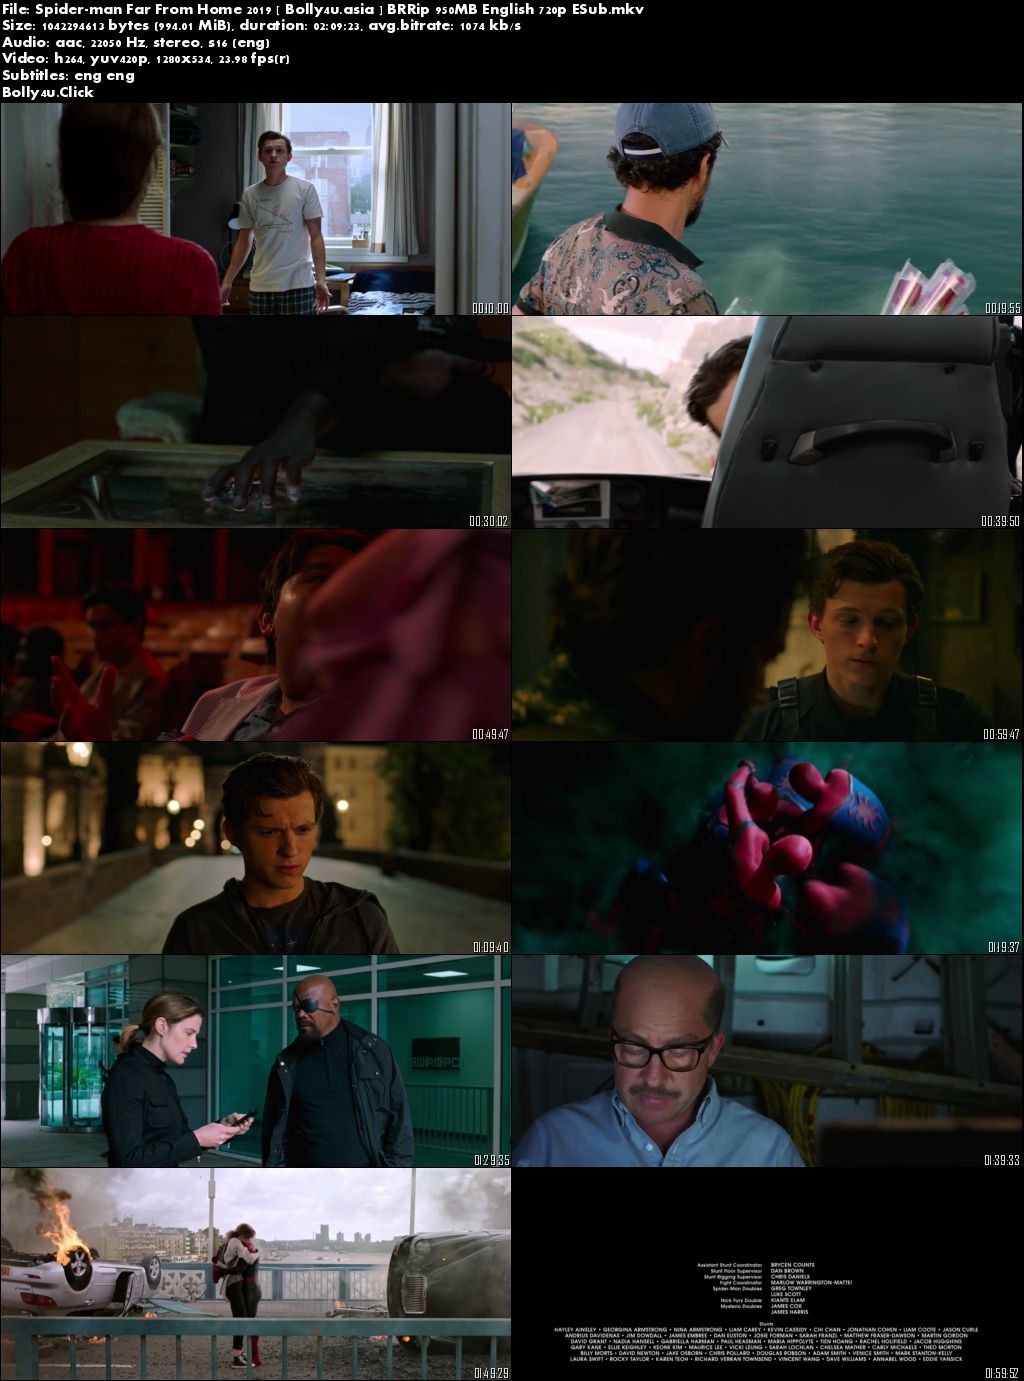 Spider-man Far From Home 2019 BRRip 950Mb English 720p ESub Download